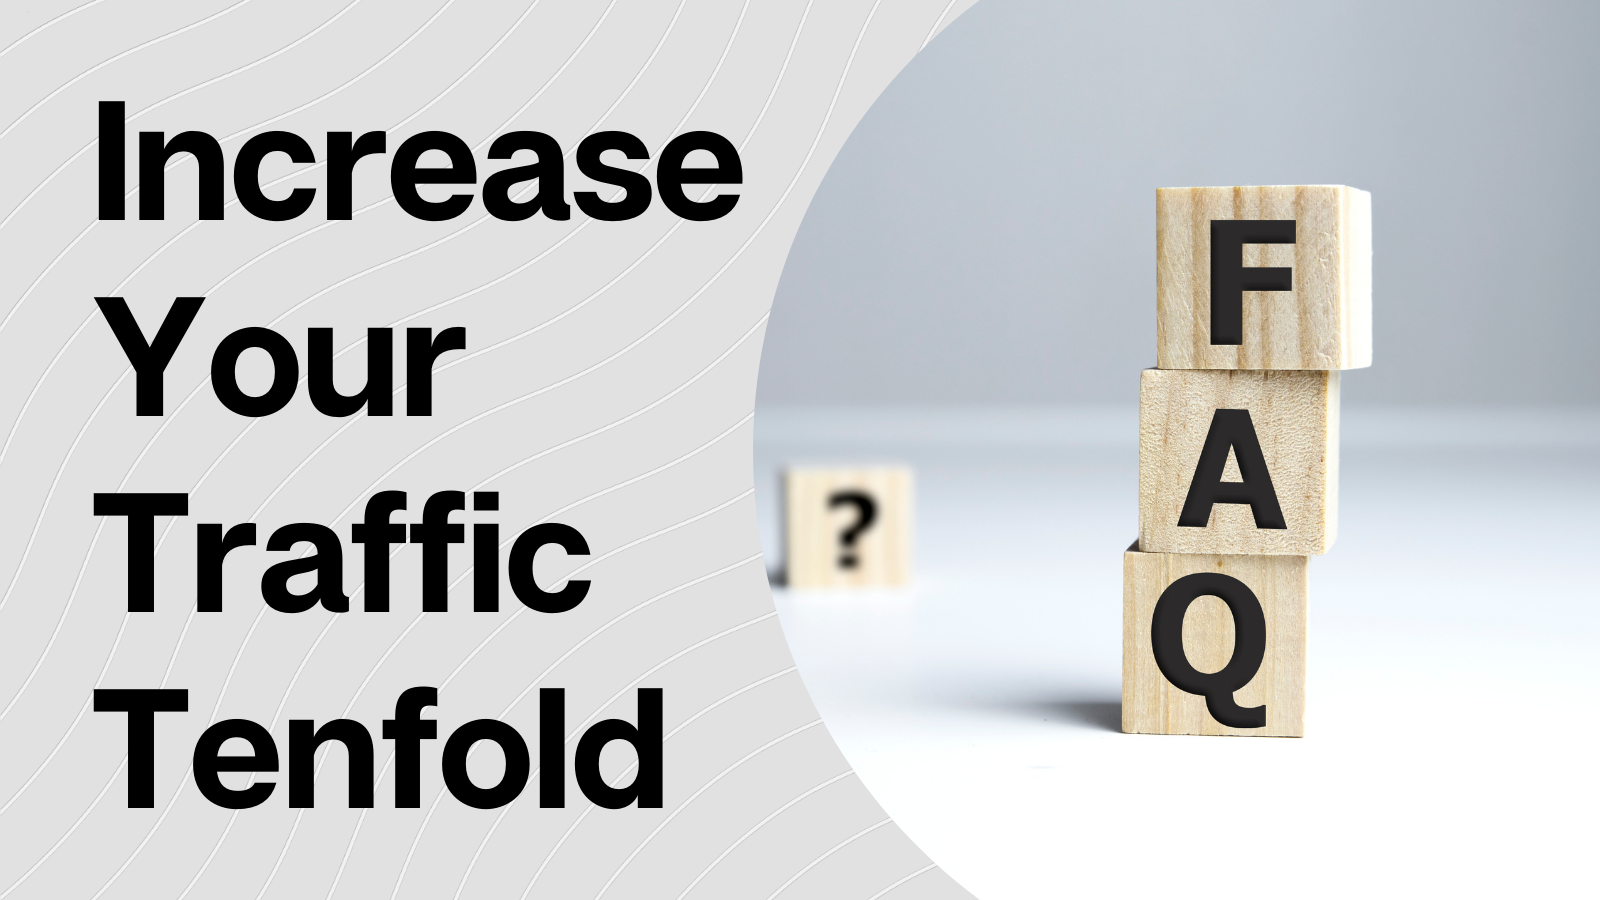 Steal These Examples Of FAQ And Increase Your Traffic Tenfold